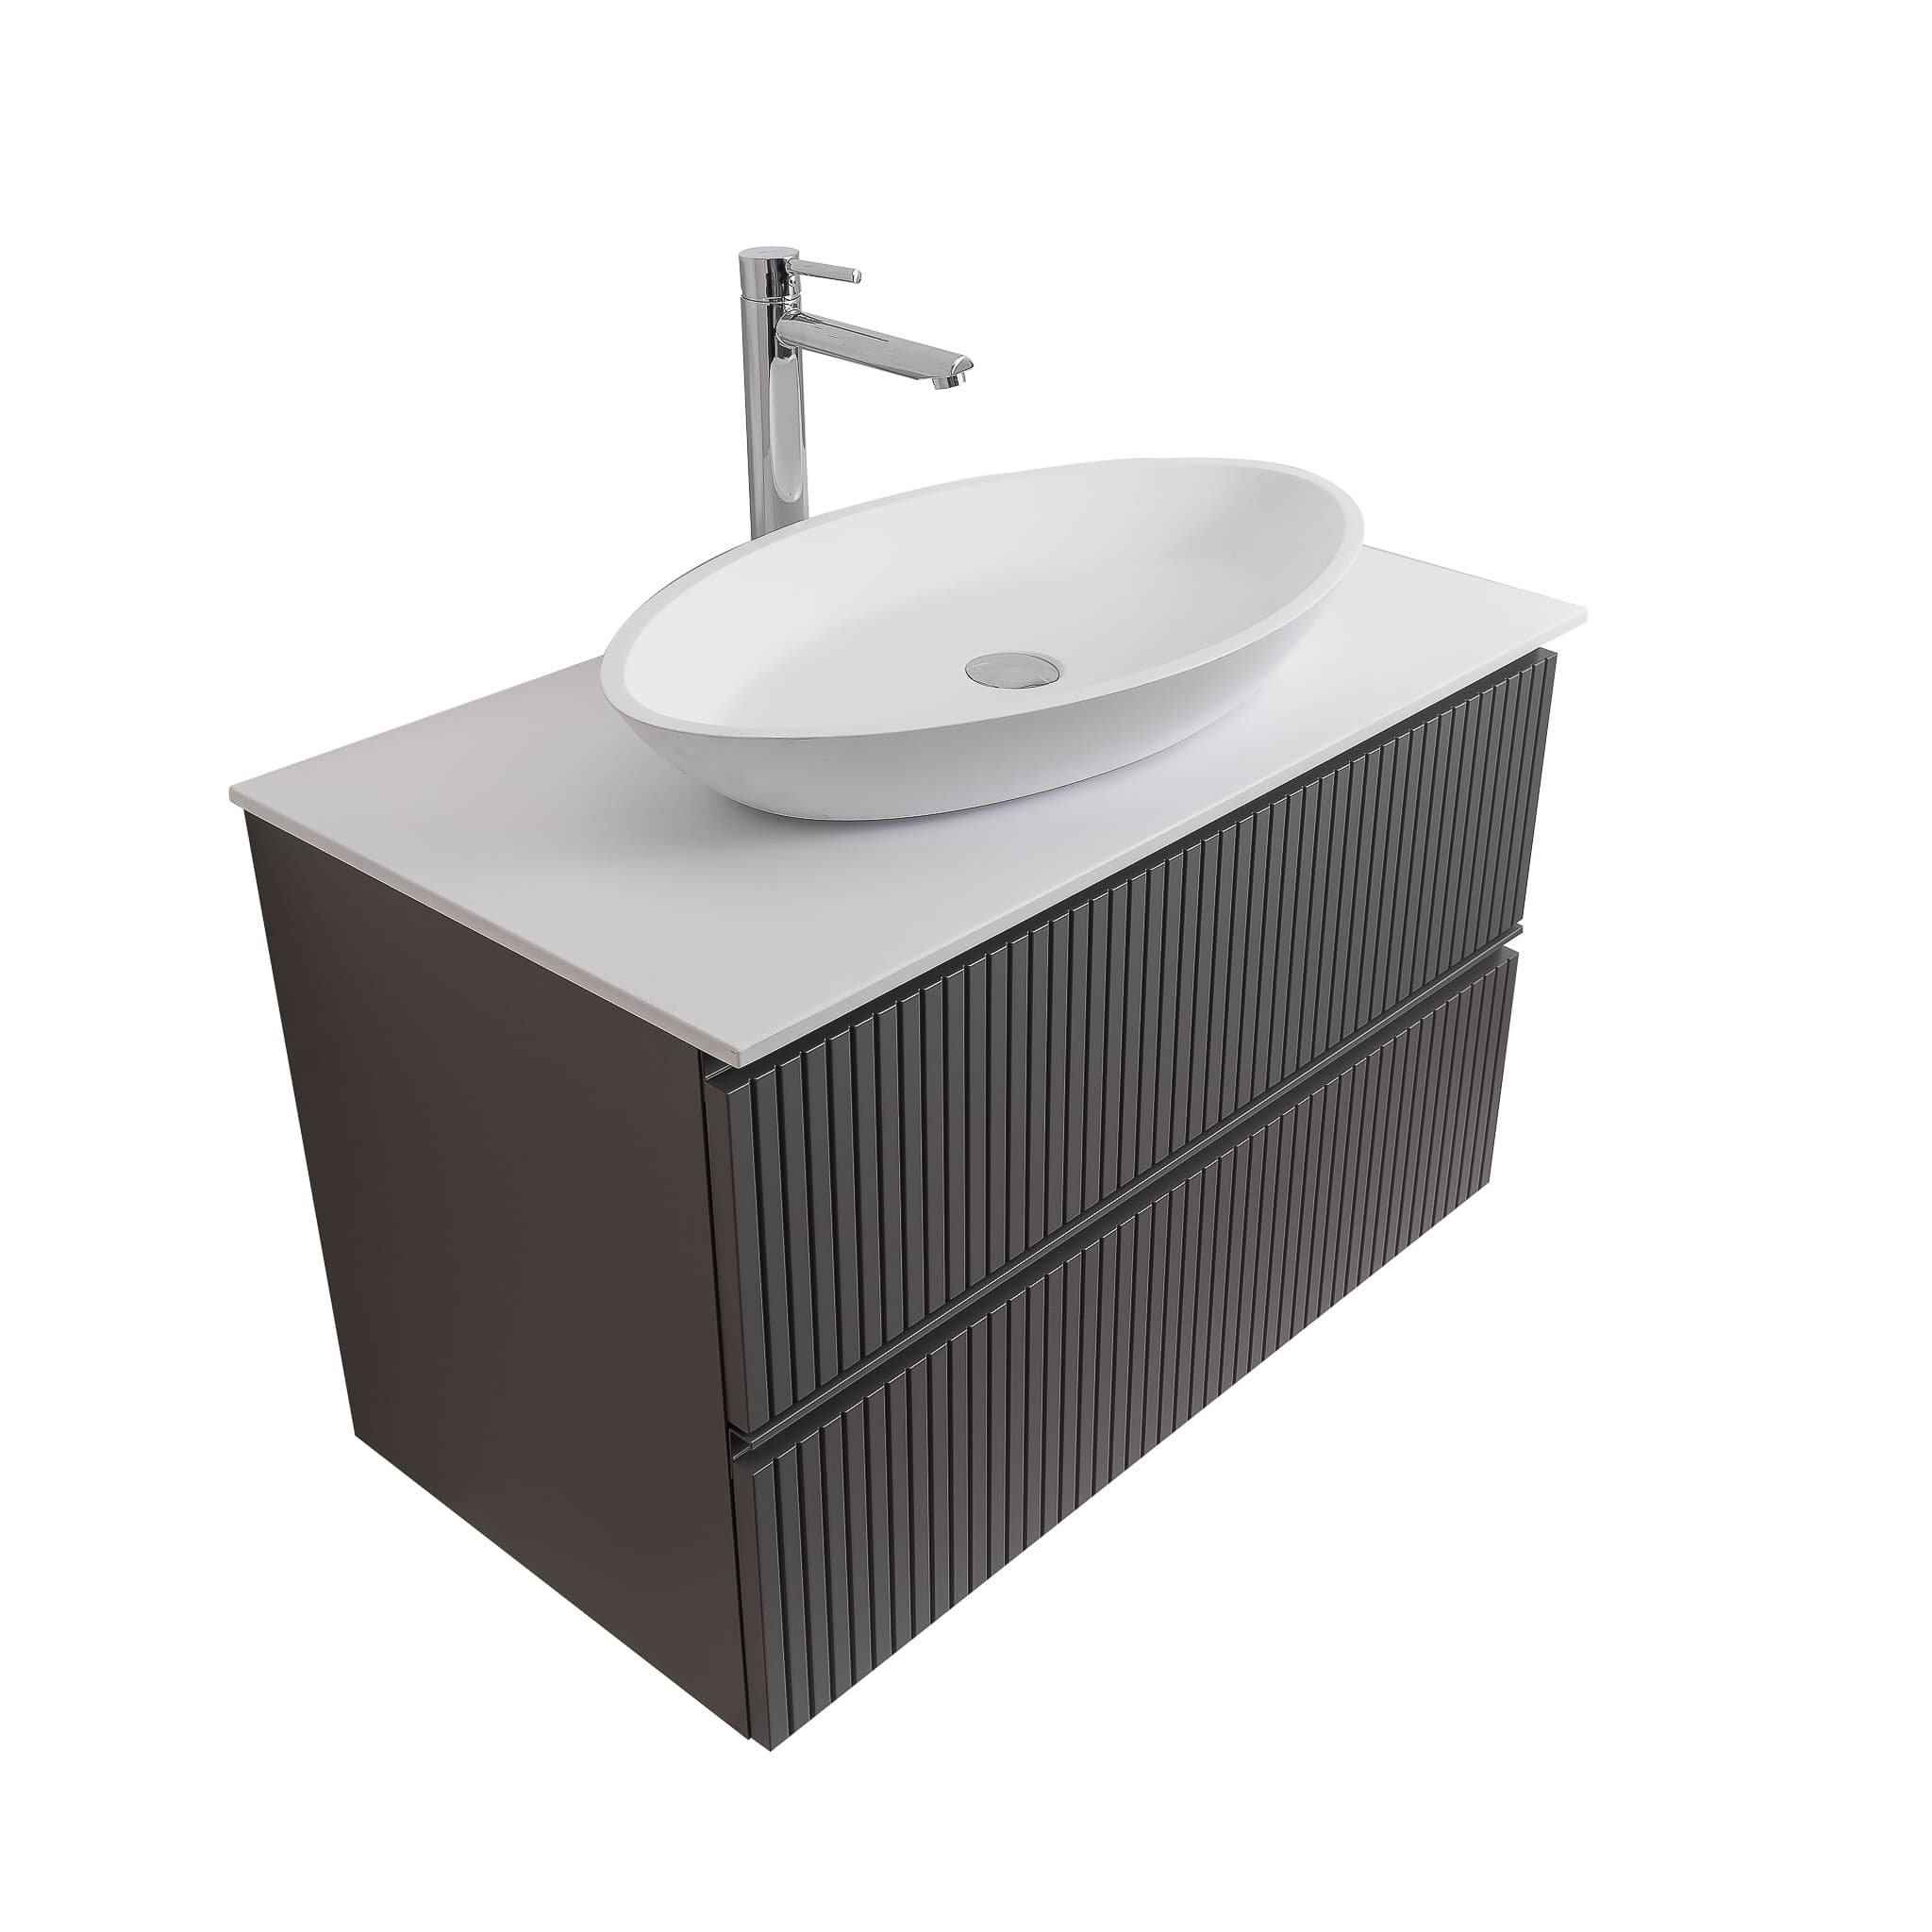 Ares 39.5 Matte Grey Cabinet, Solid Surface Flat White Counter And Oval Solid Surface White Basin 1305, Wall Mounted Modern Vanity Set